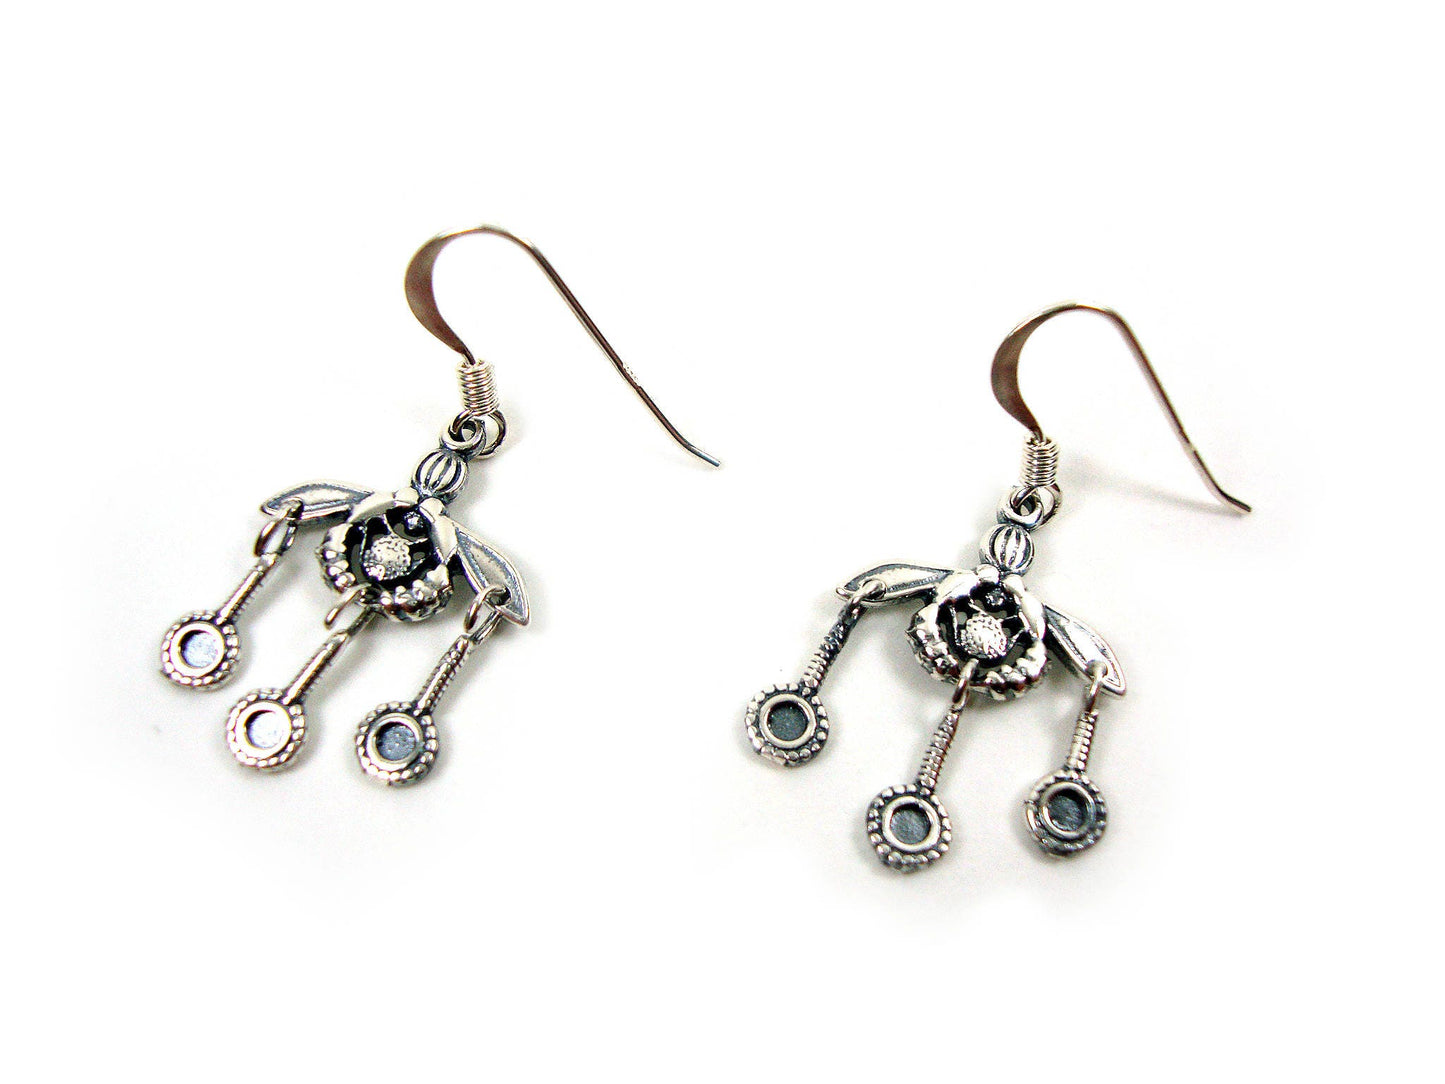 Sterling Silver 925 Ancient Greek Malia Bees Boucles d'oreilles 15mm, Boucles d'oreilles minoennes, Boucles d'oreilles en argent grec, Griechische Silber Ohrringe Schmuck Bees